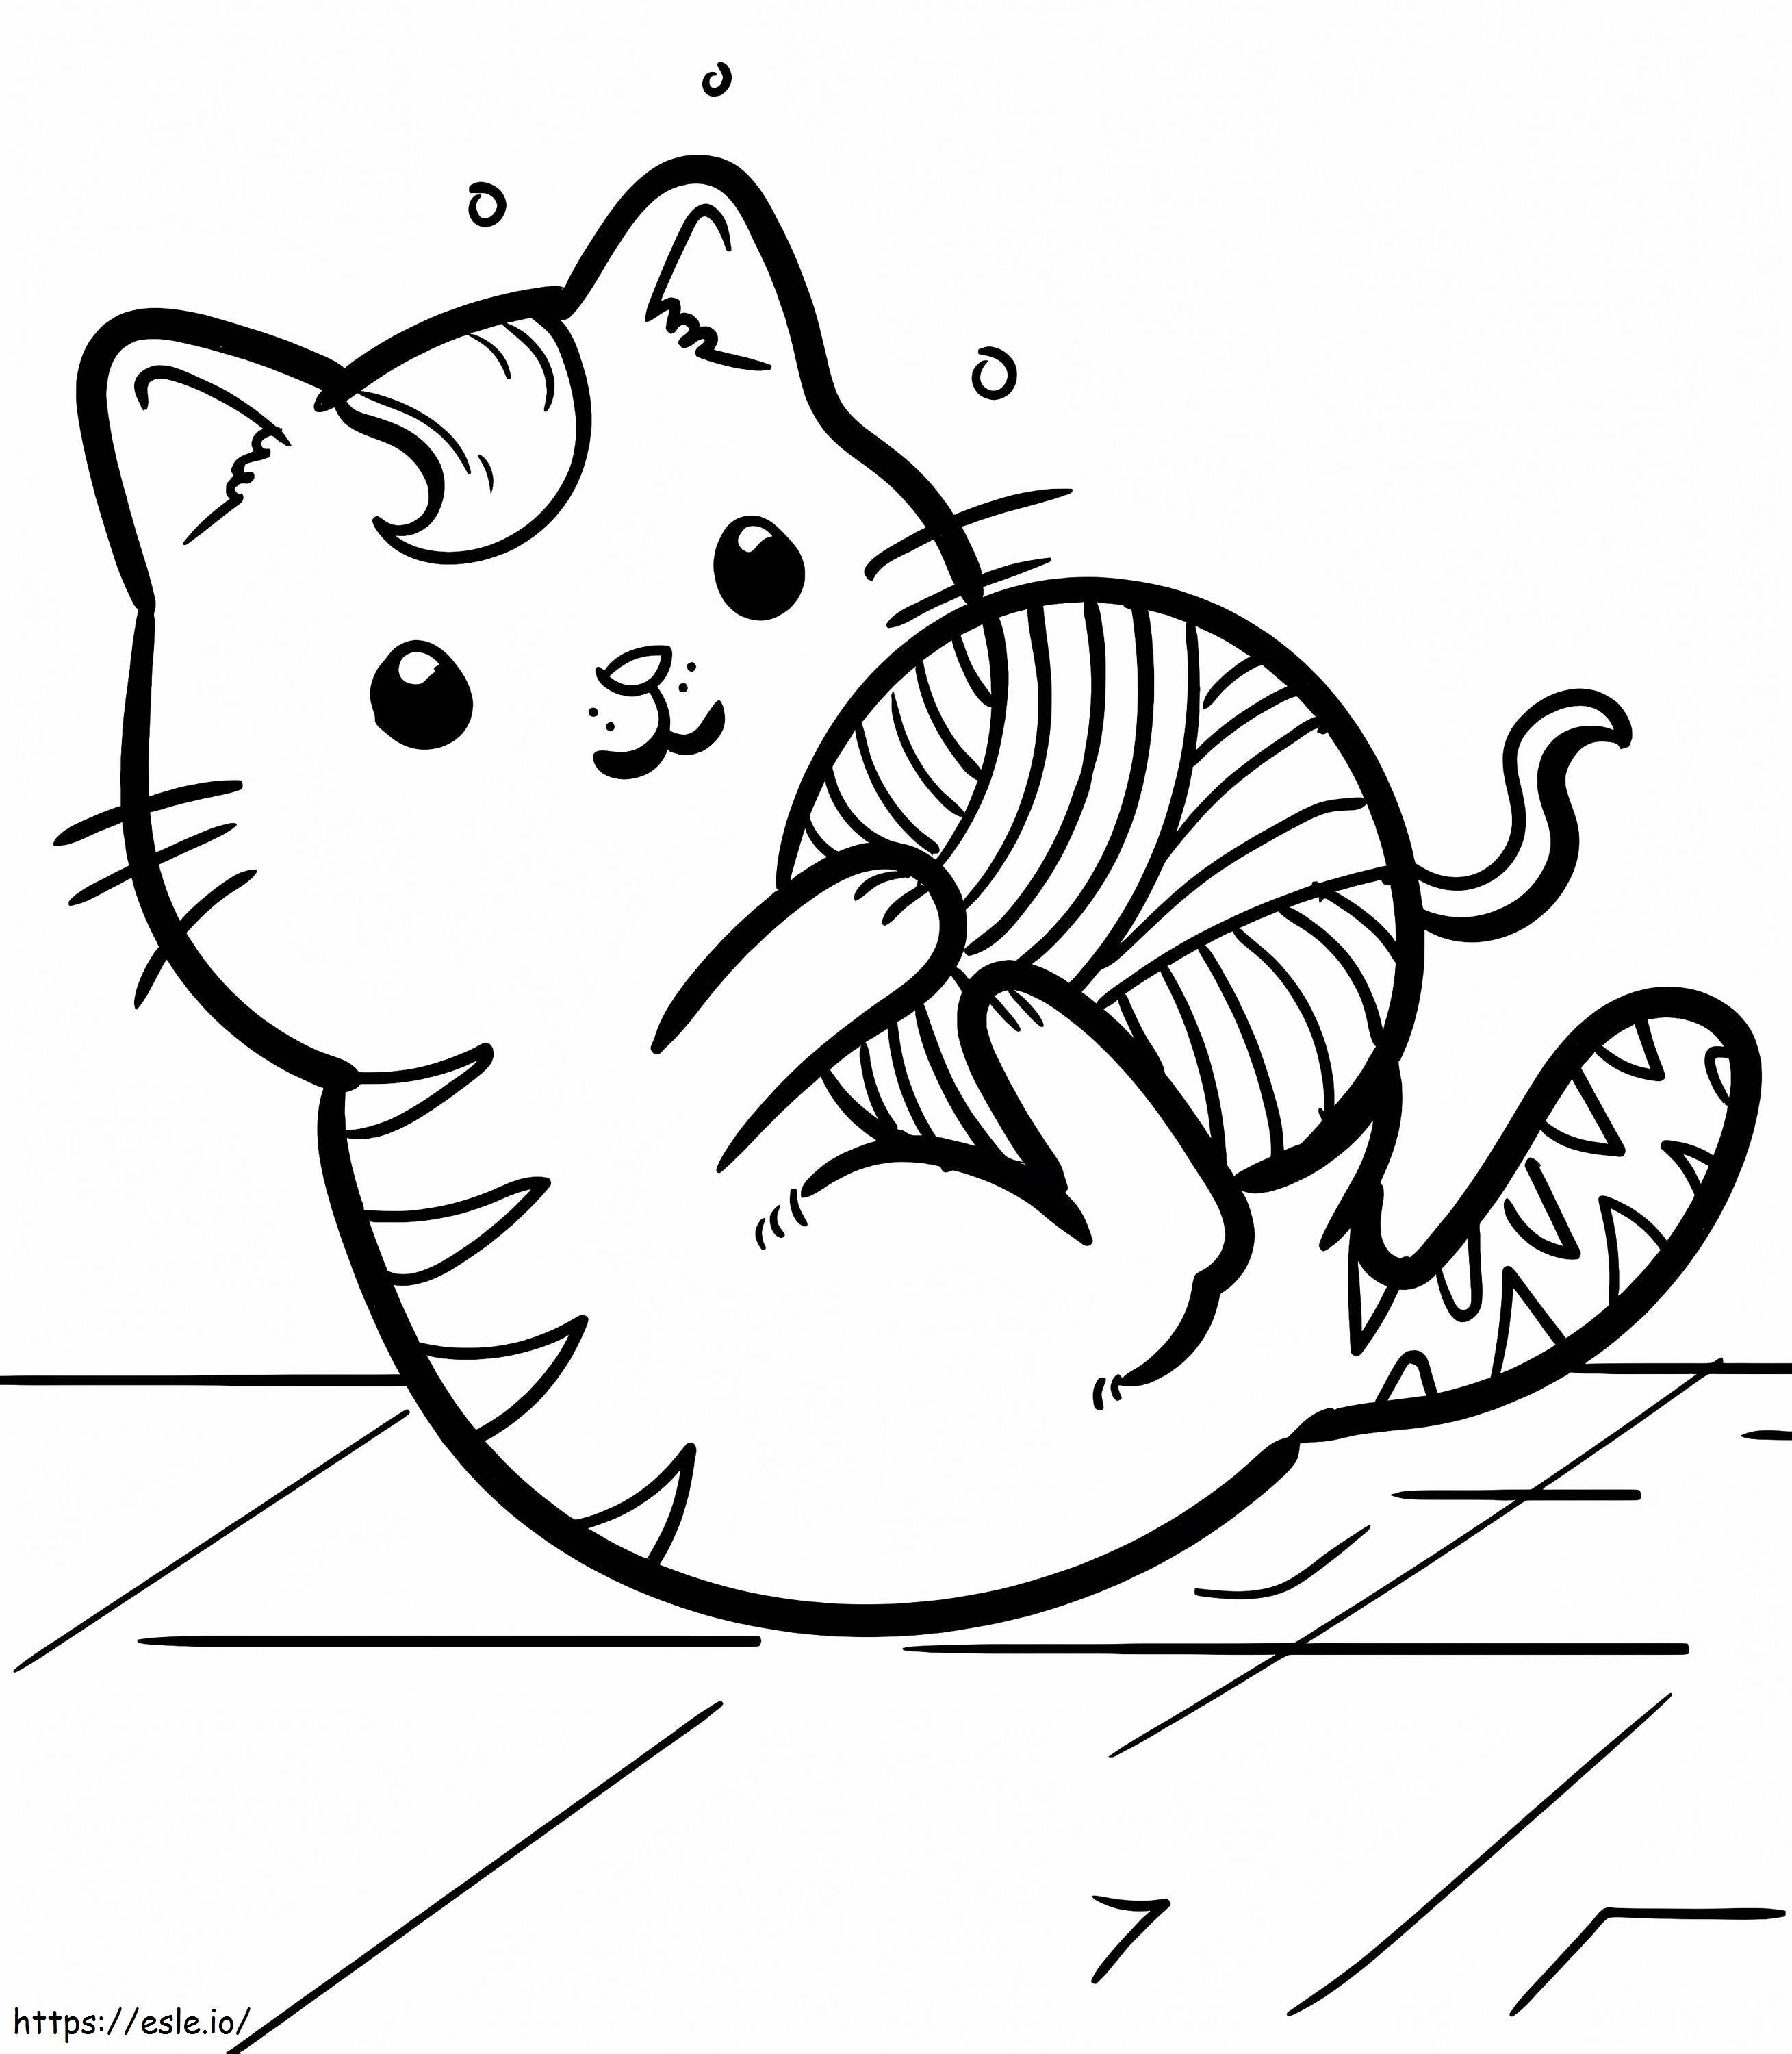 Kitten Playing coloring page